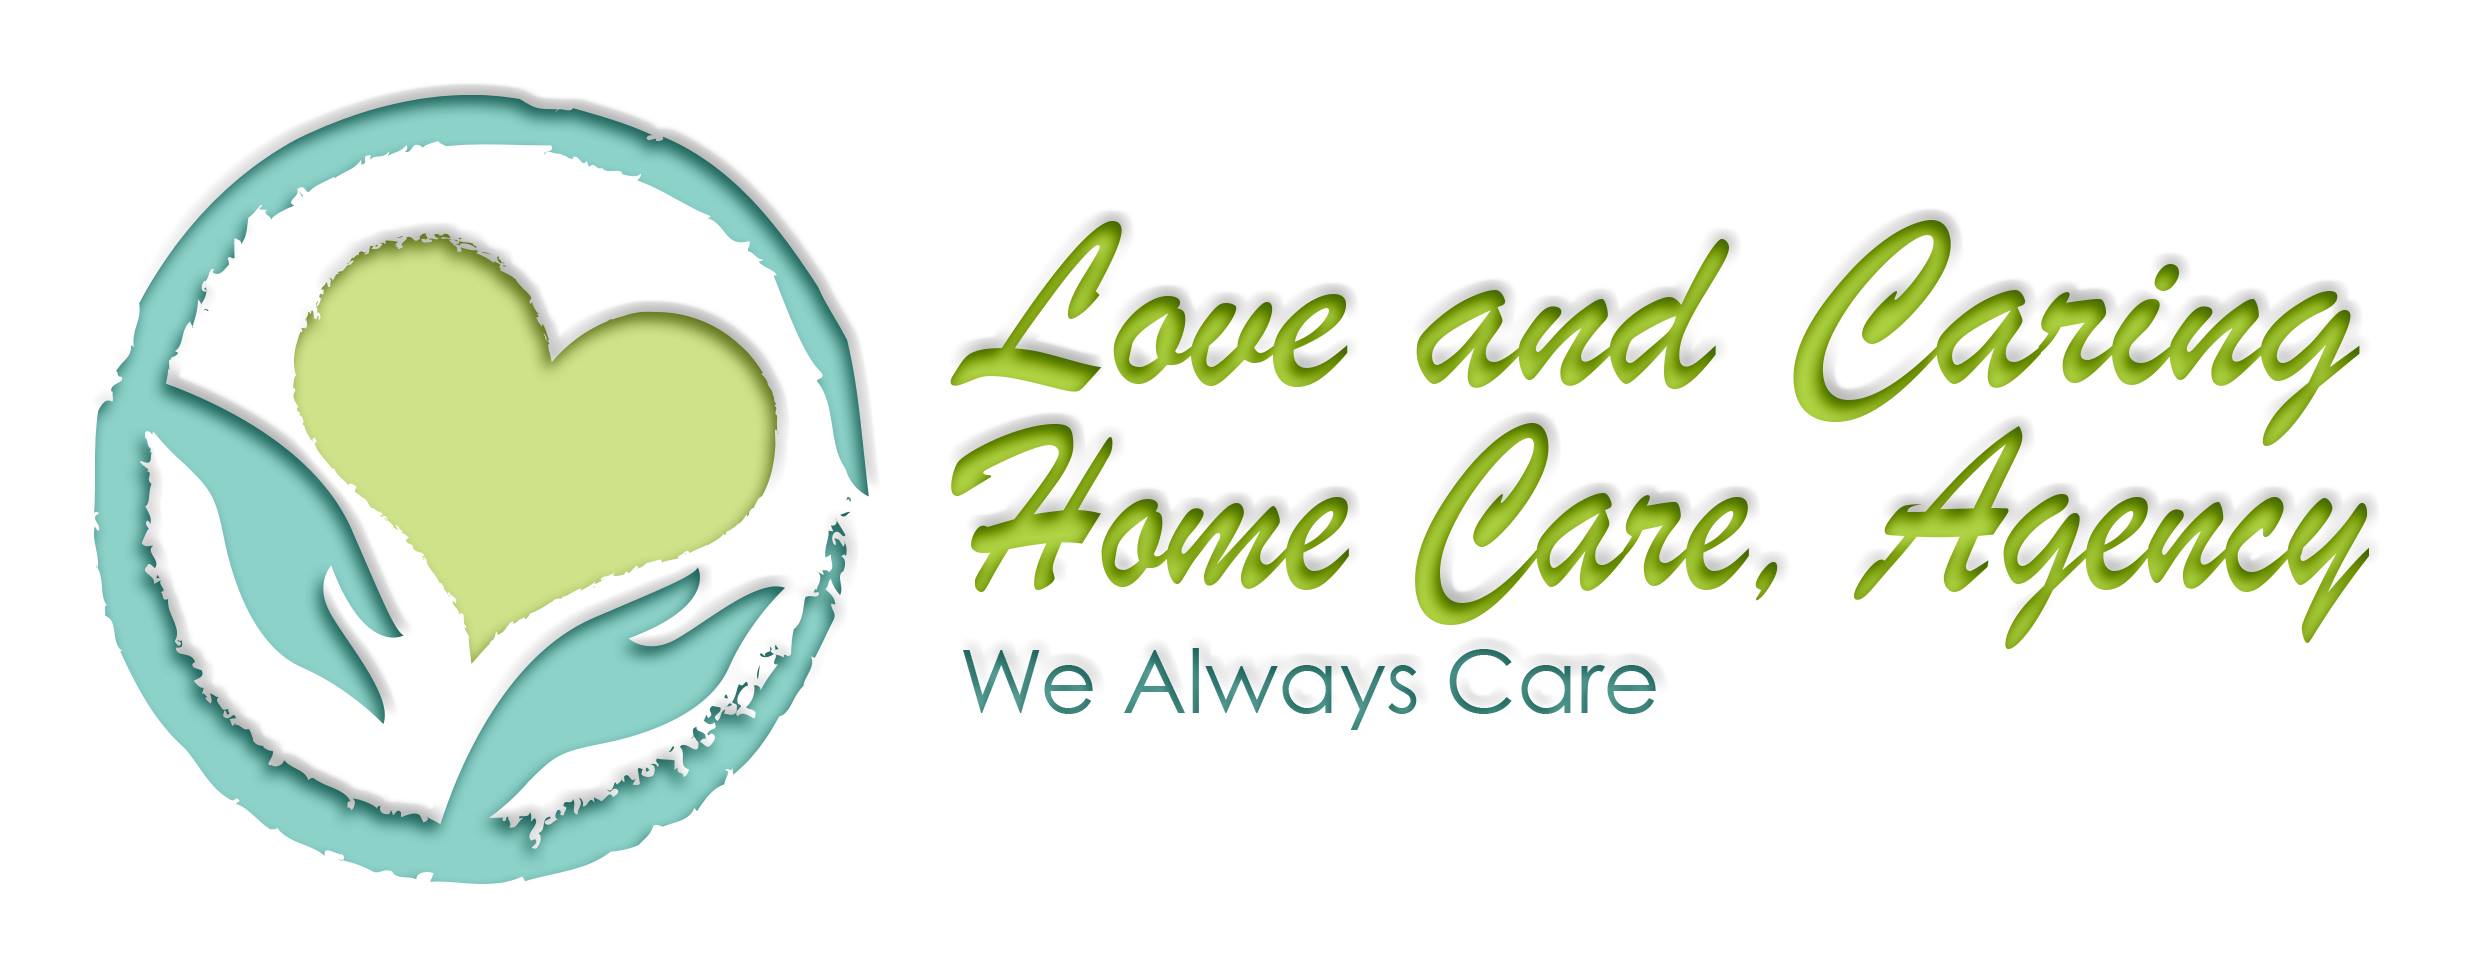 Love and Caring Homecare Agency